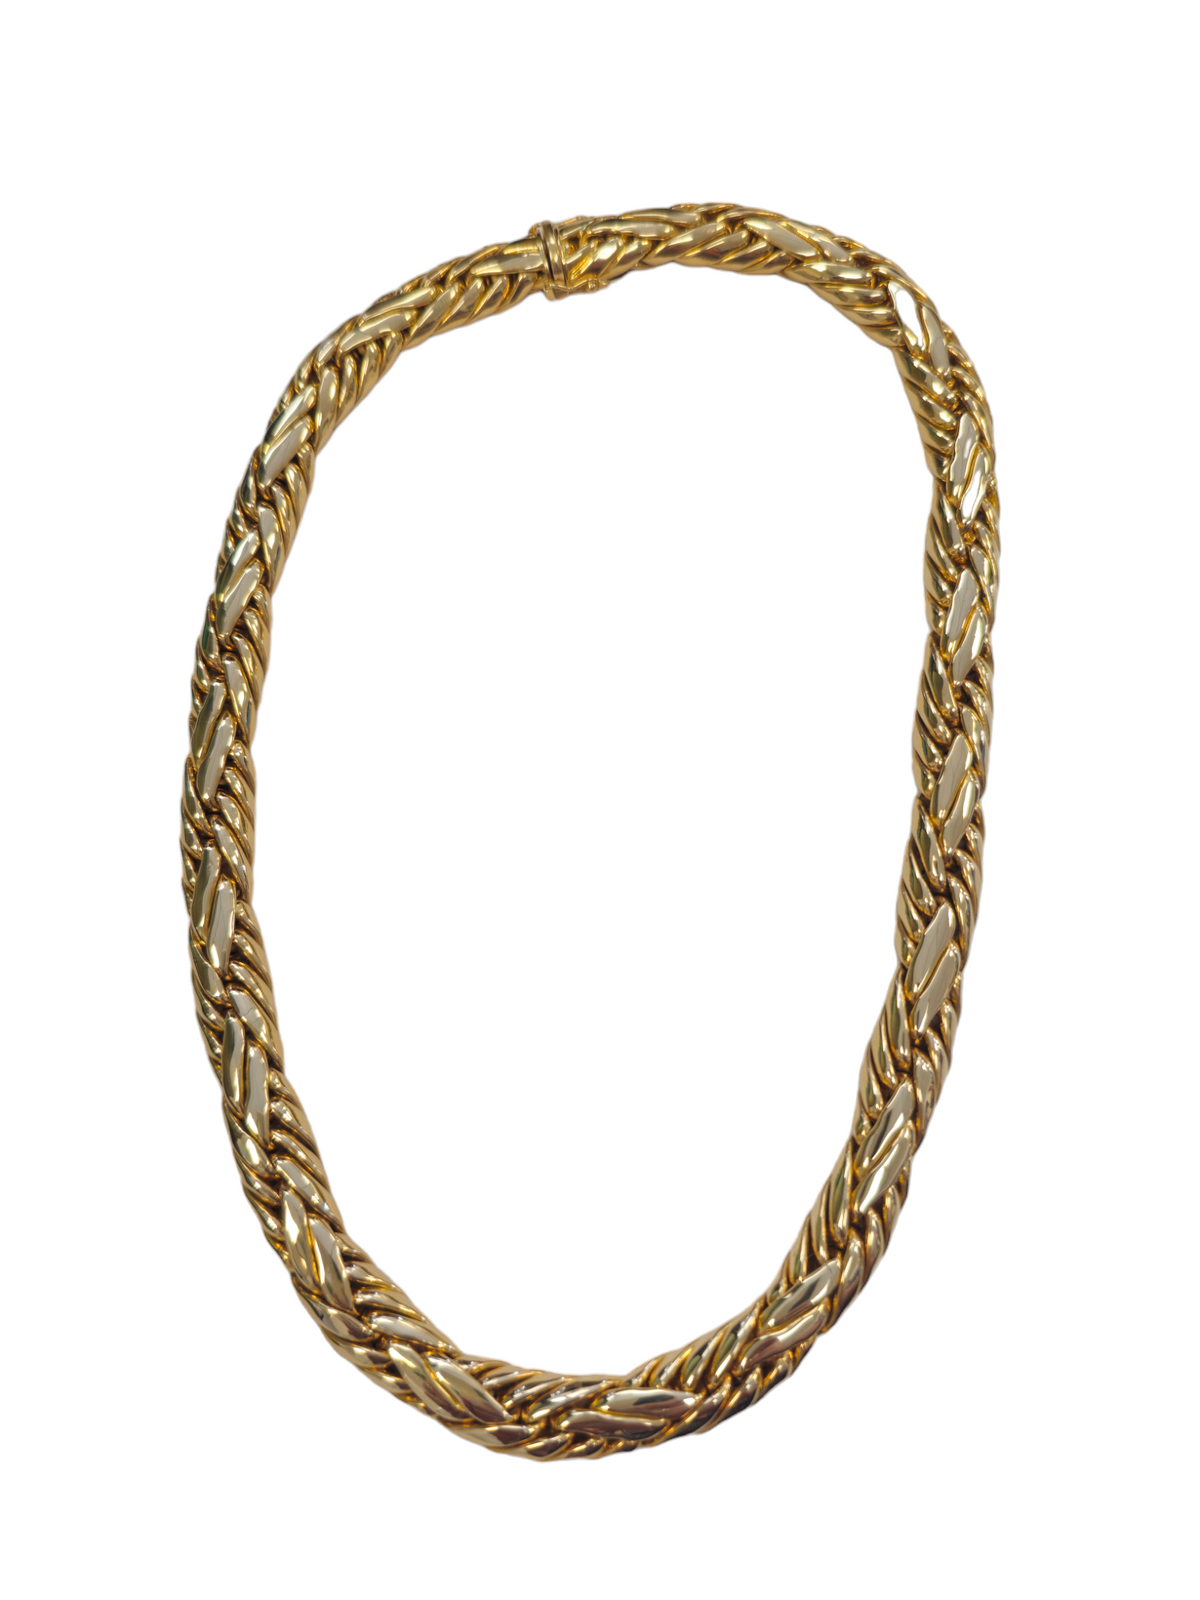 Authentic "Chaumet" Fancy weave link necklace made in 18-karat yellow gold